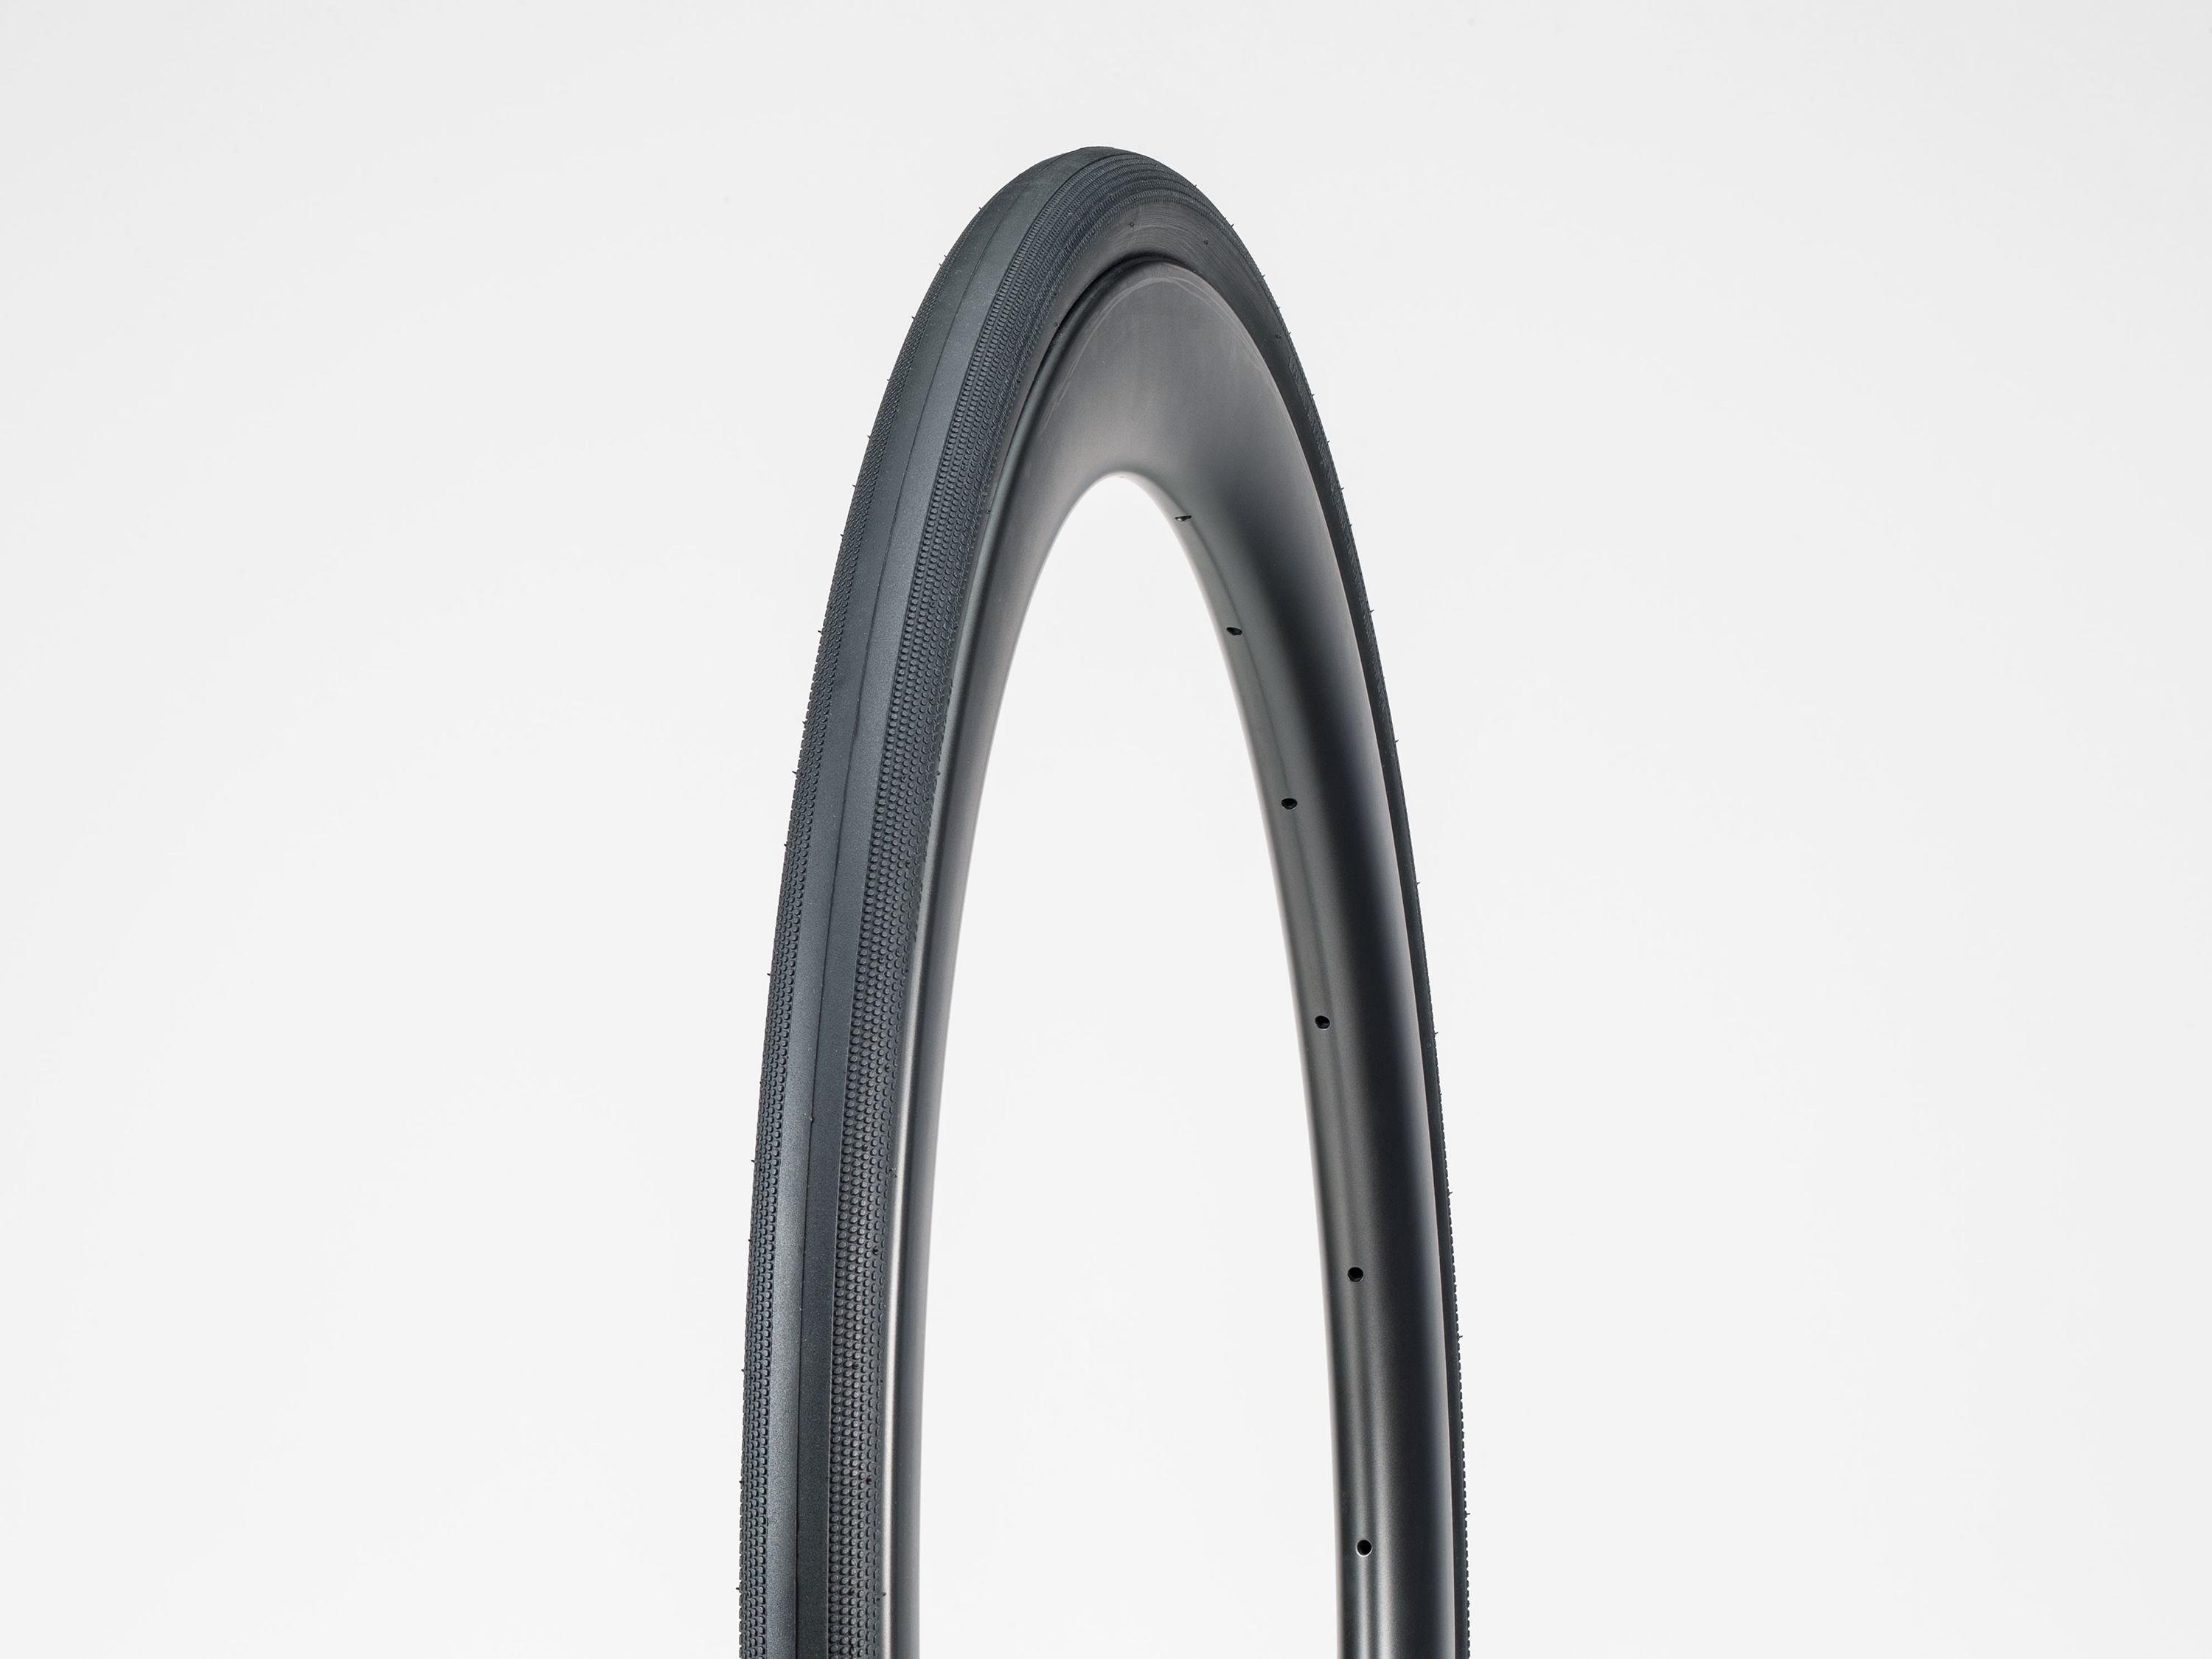 32mm tubeless road tyres